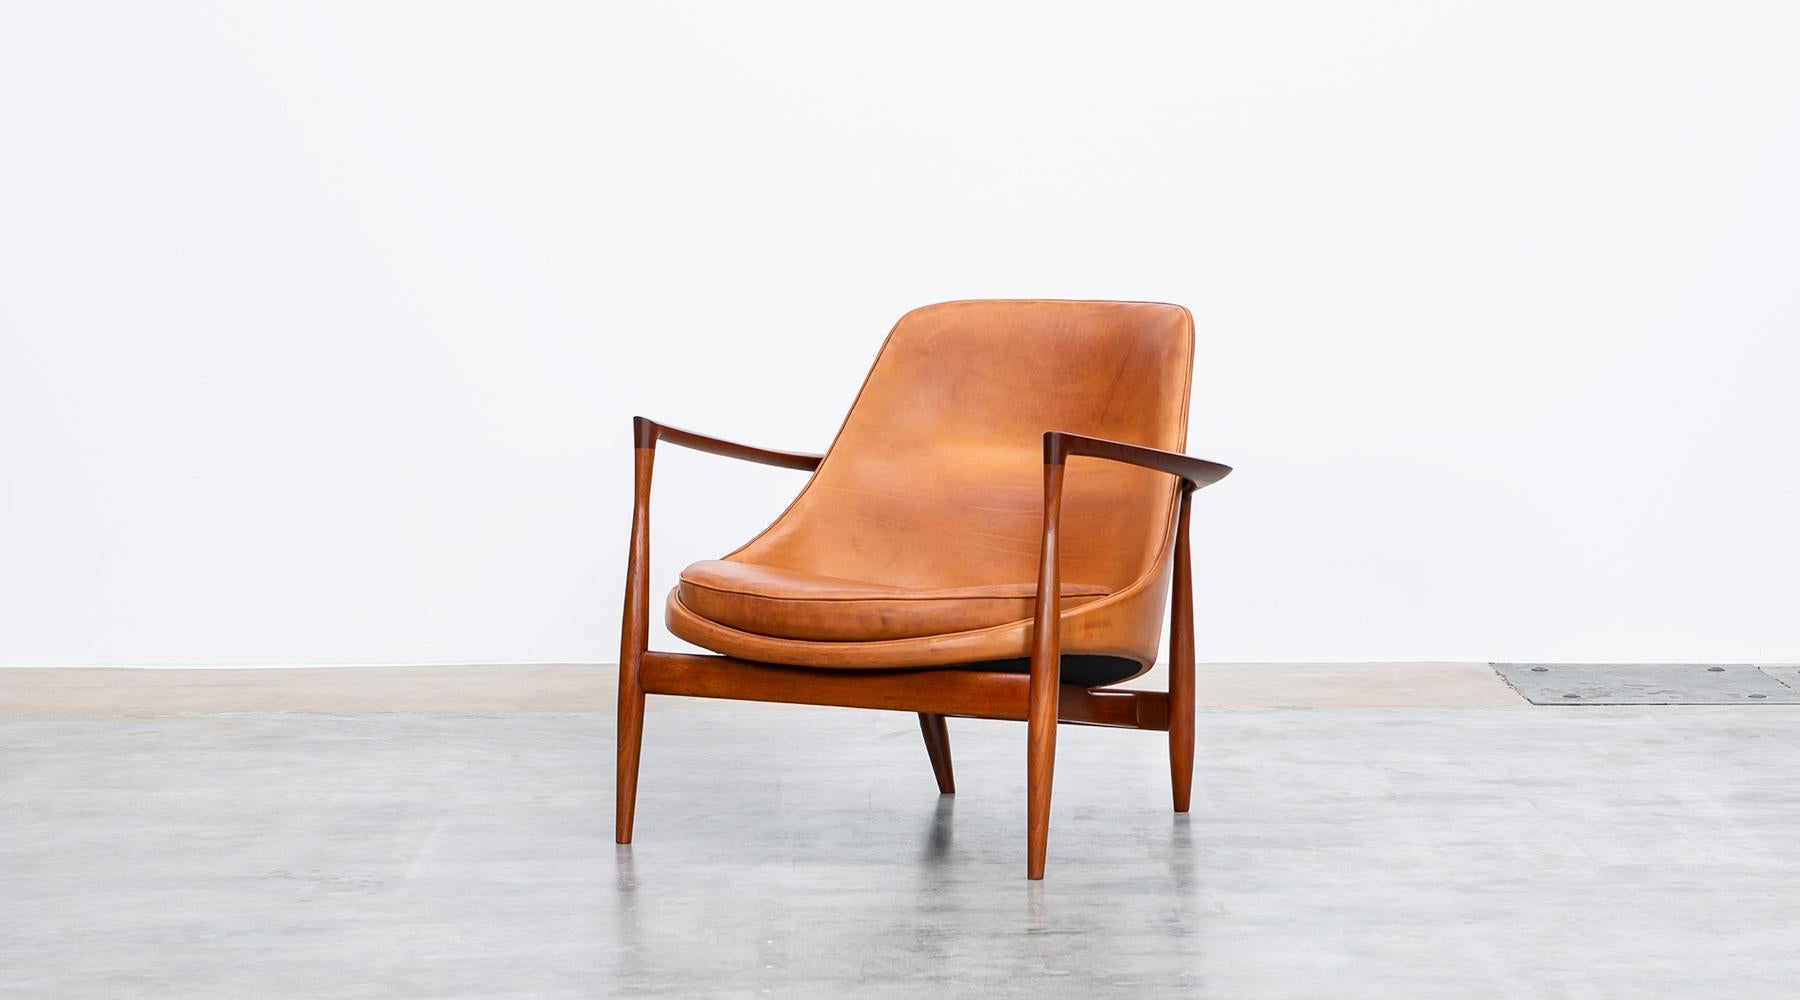 Mid-20th Century 1950's Brown Wooden and Leather Pair of Lounge Chairs by Ib Kofod-Larsen